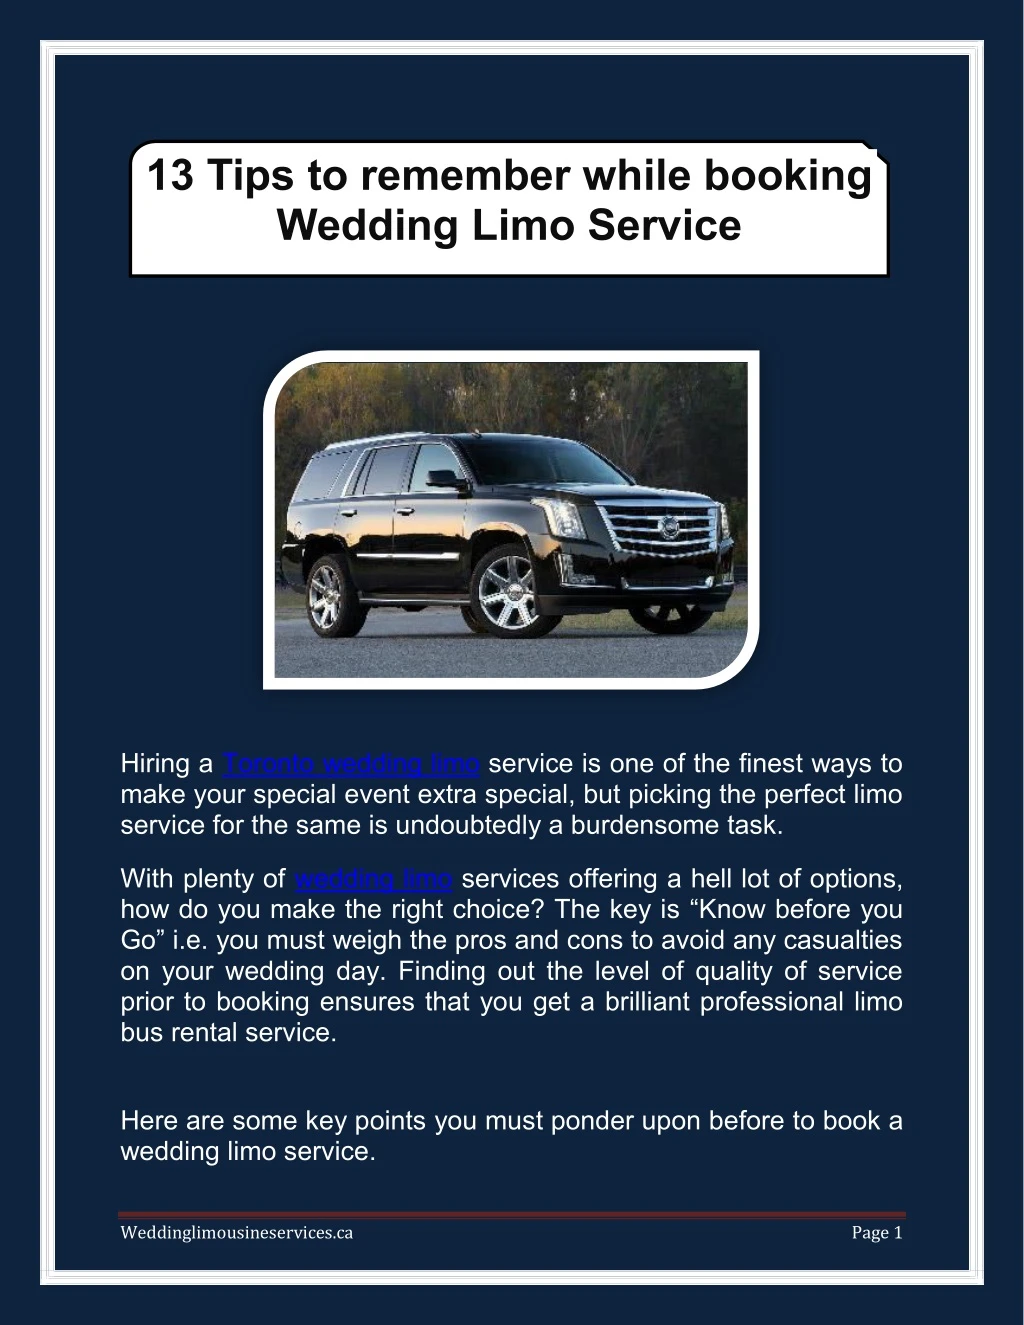 13 tips to remember while booking wedding limo